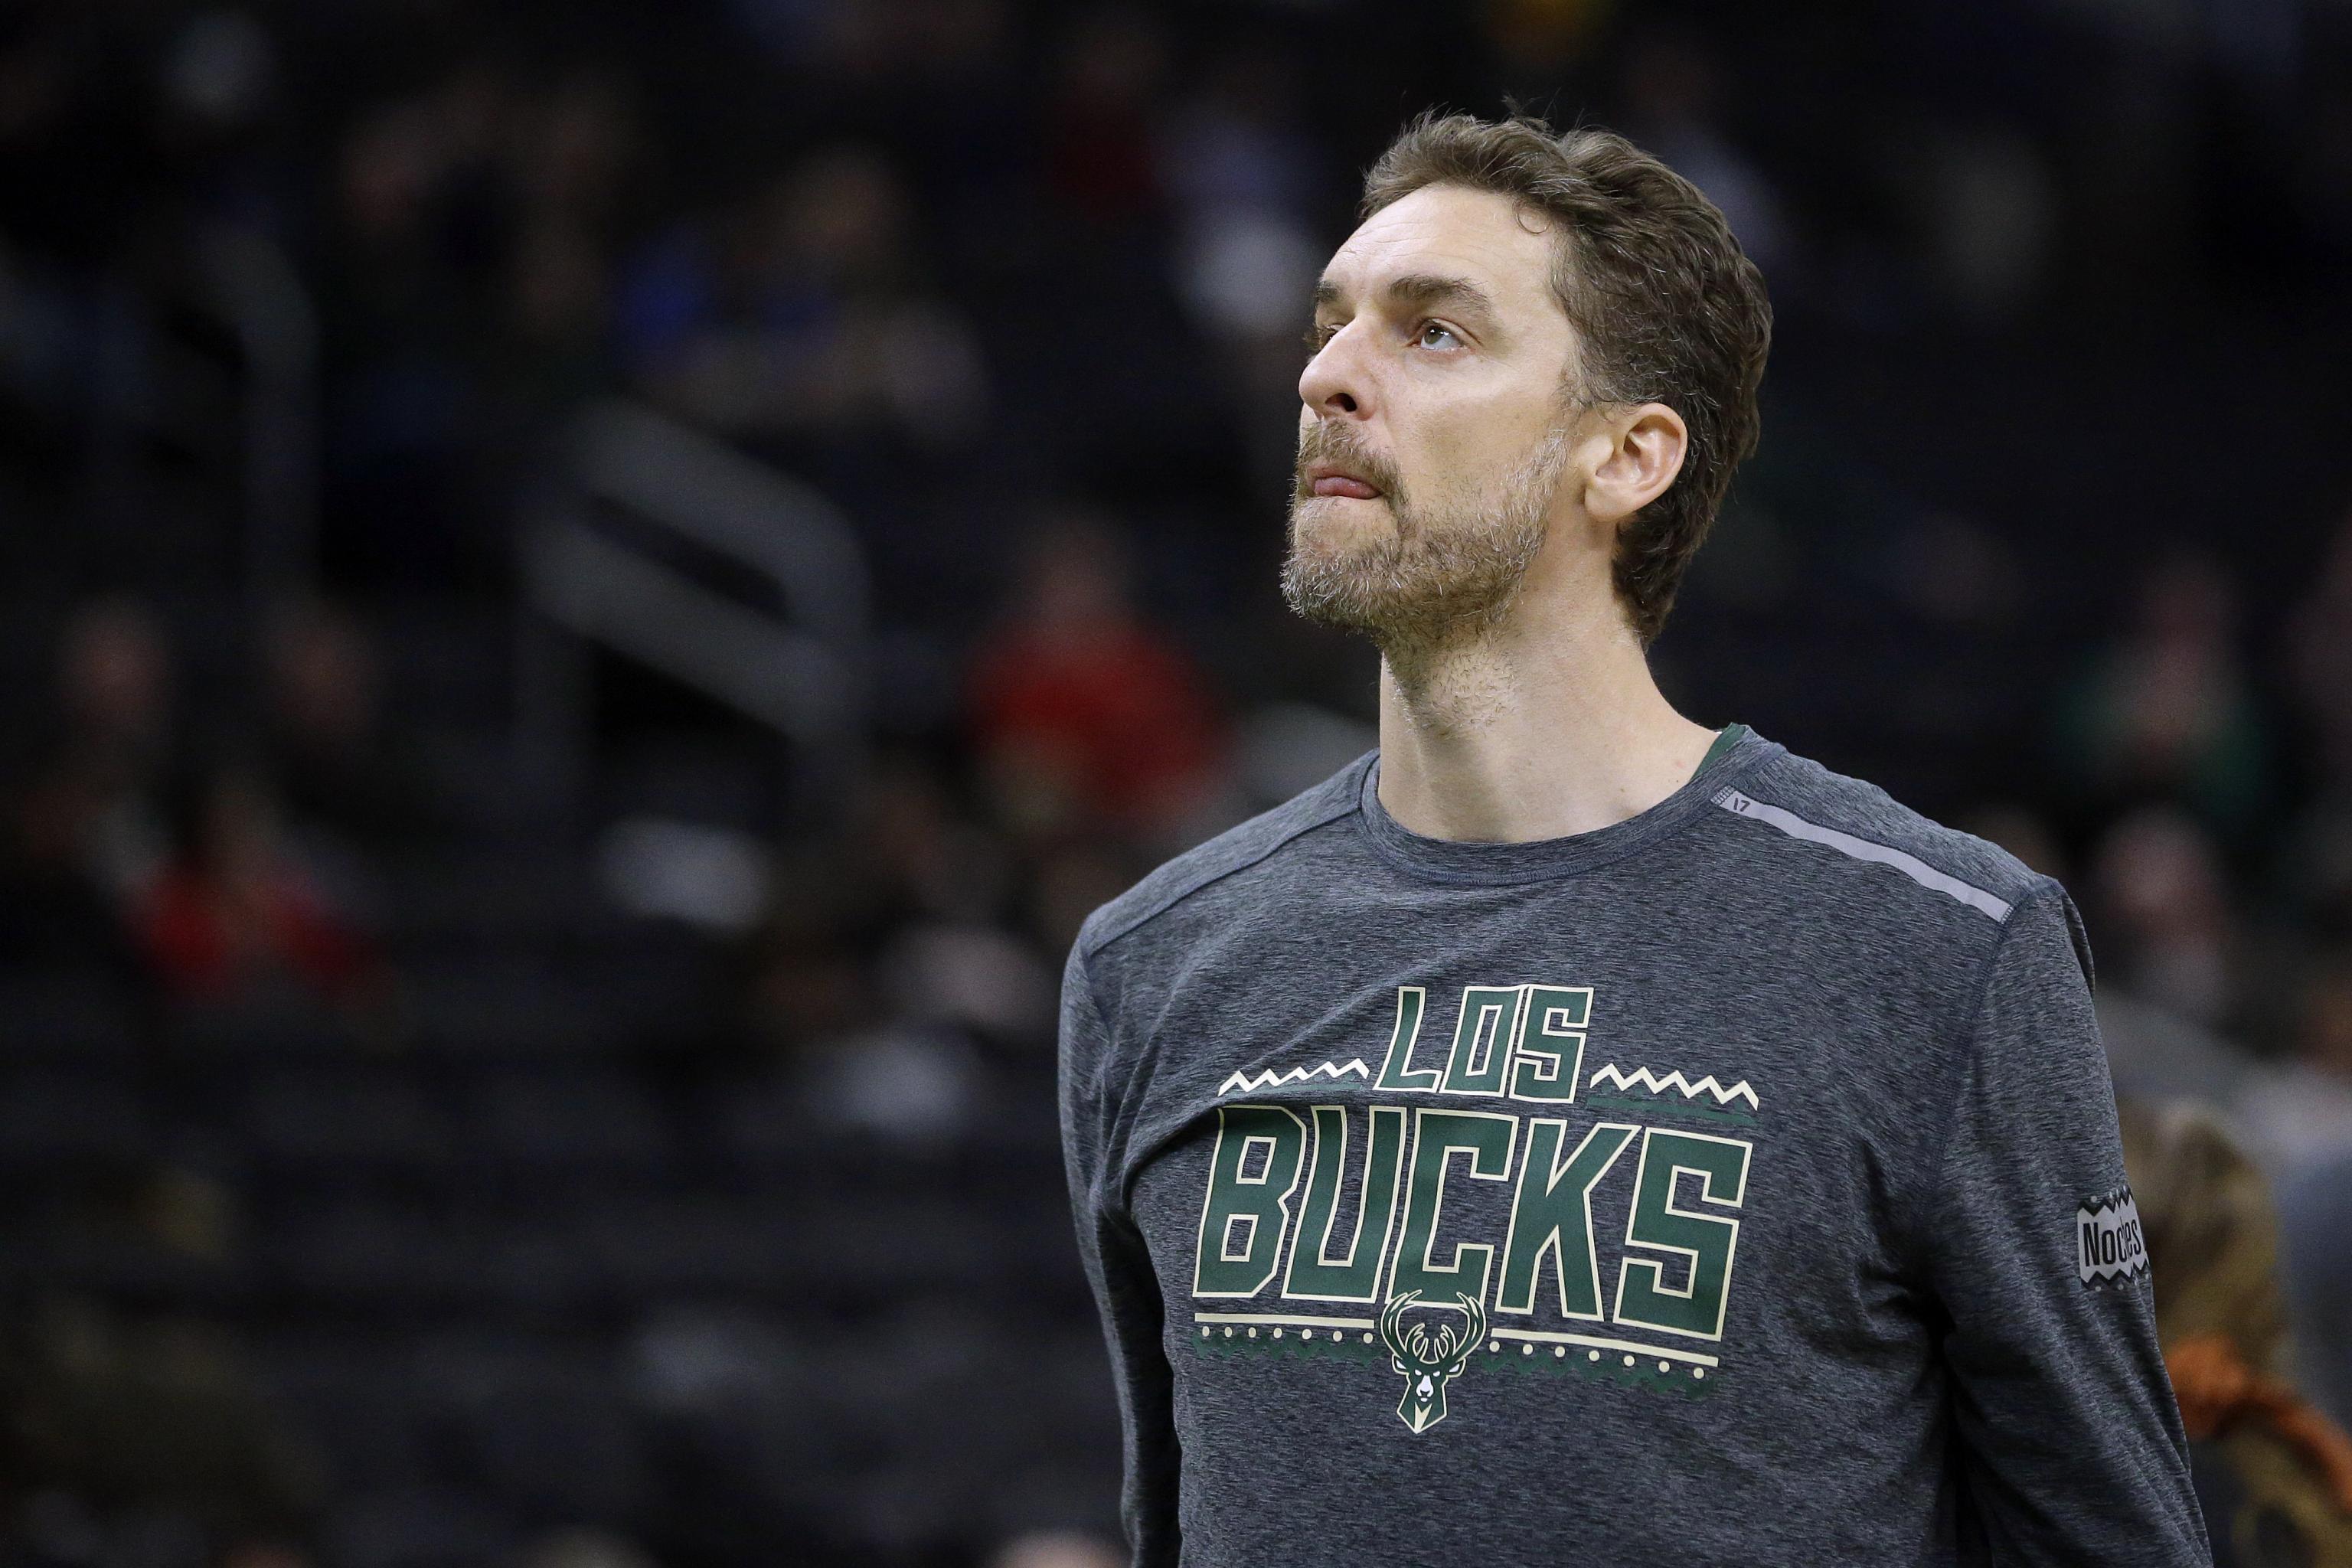 Report: Pau Gasol plans to sign with Bucks following buyout with Spurs